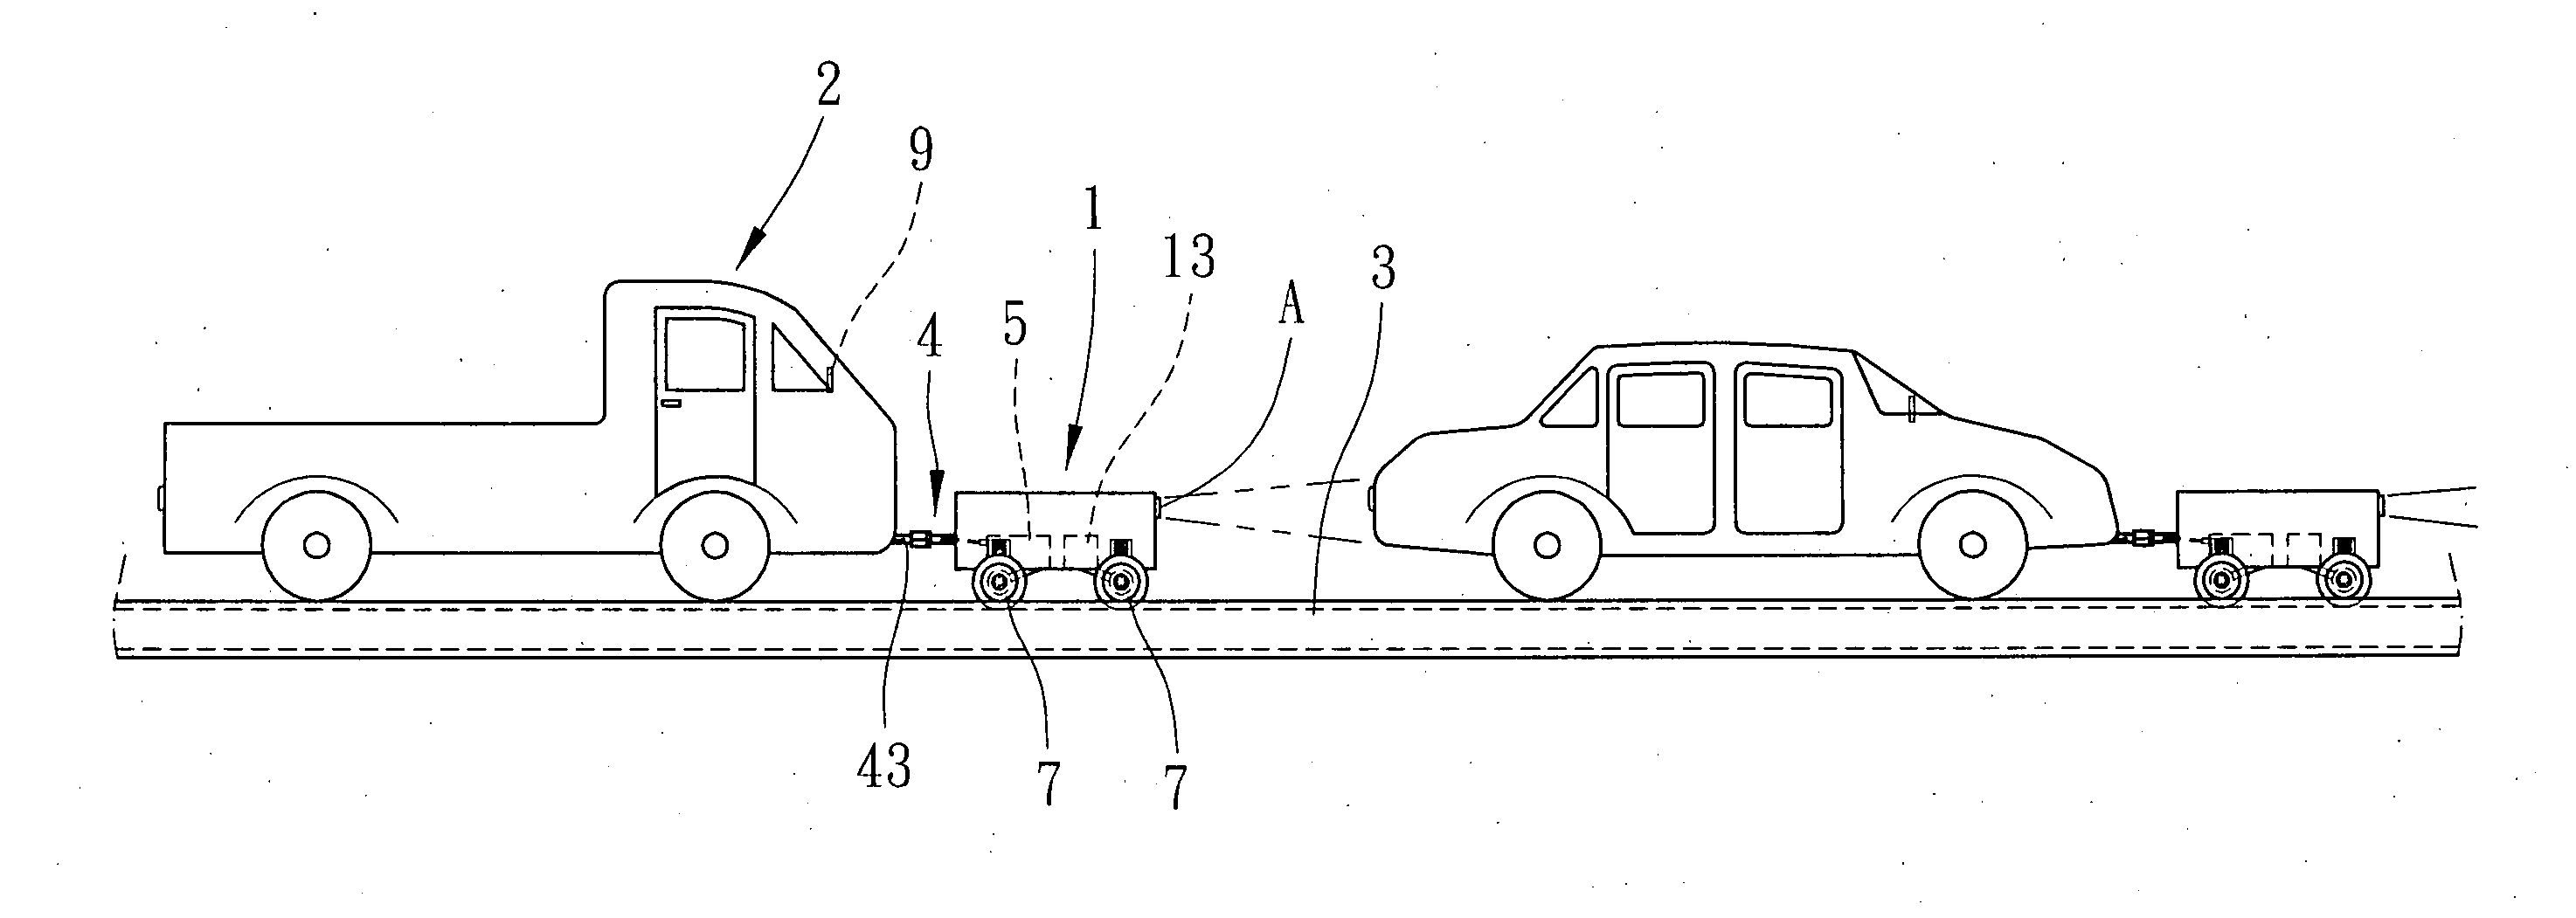 Highway vehicle towing system